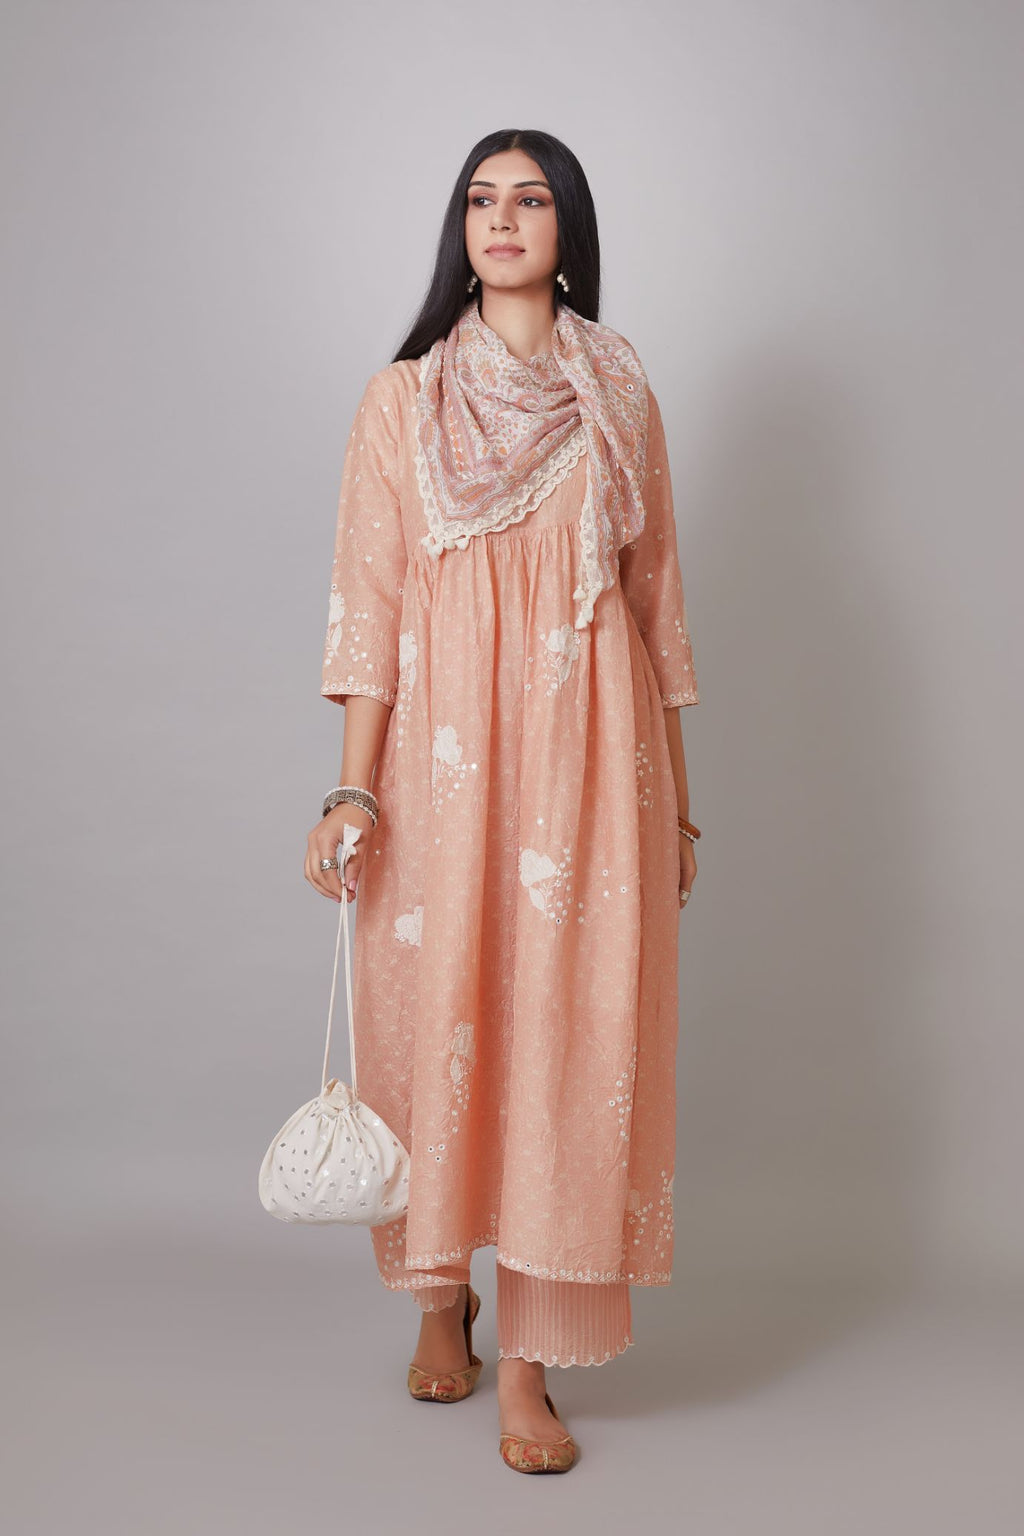 Hand block printed crushed silk kurta set with wavy empire waistline and gathers, highlighted with applique flower embroidery and mirror hand work.